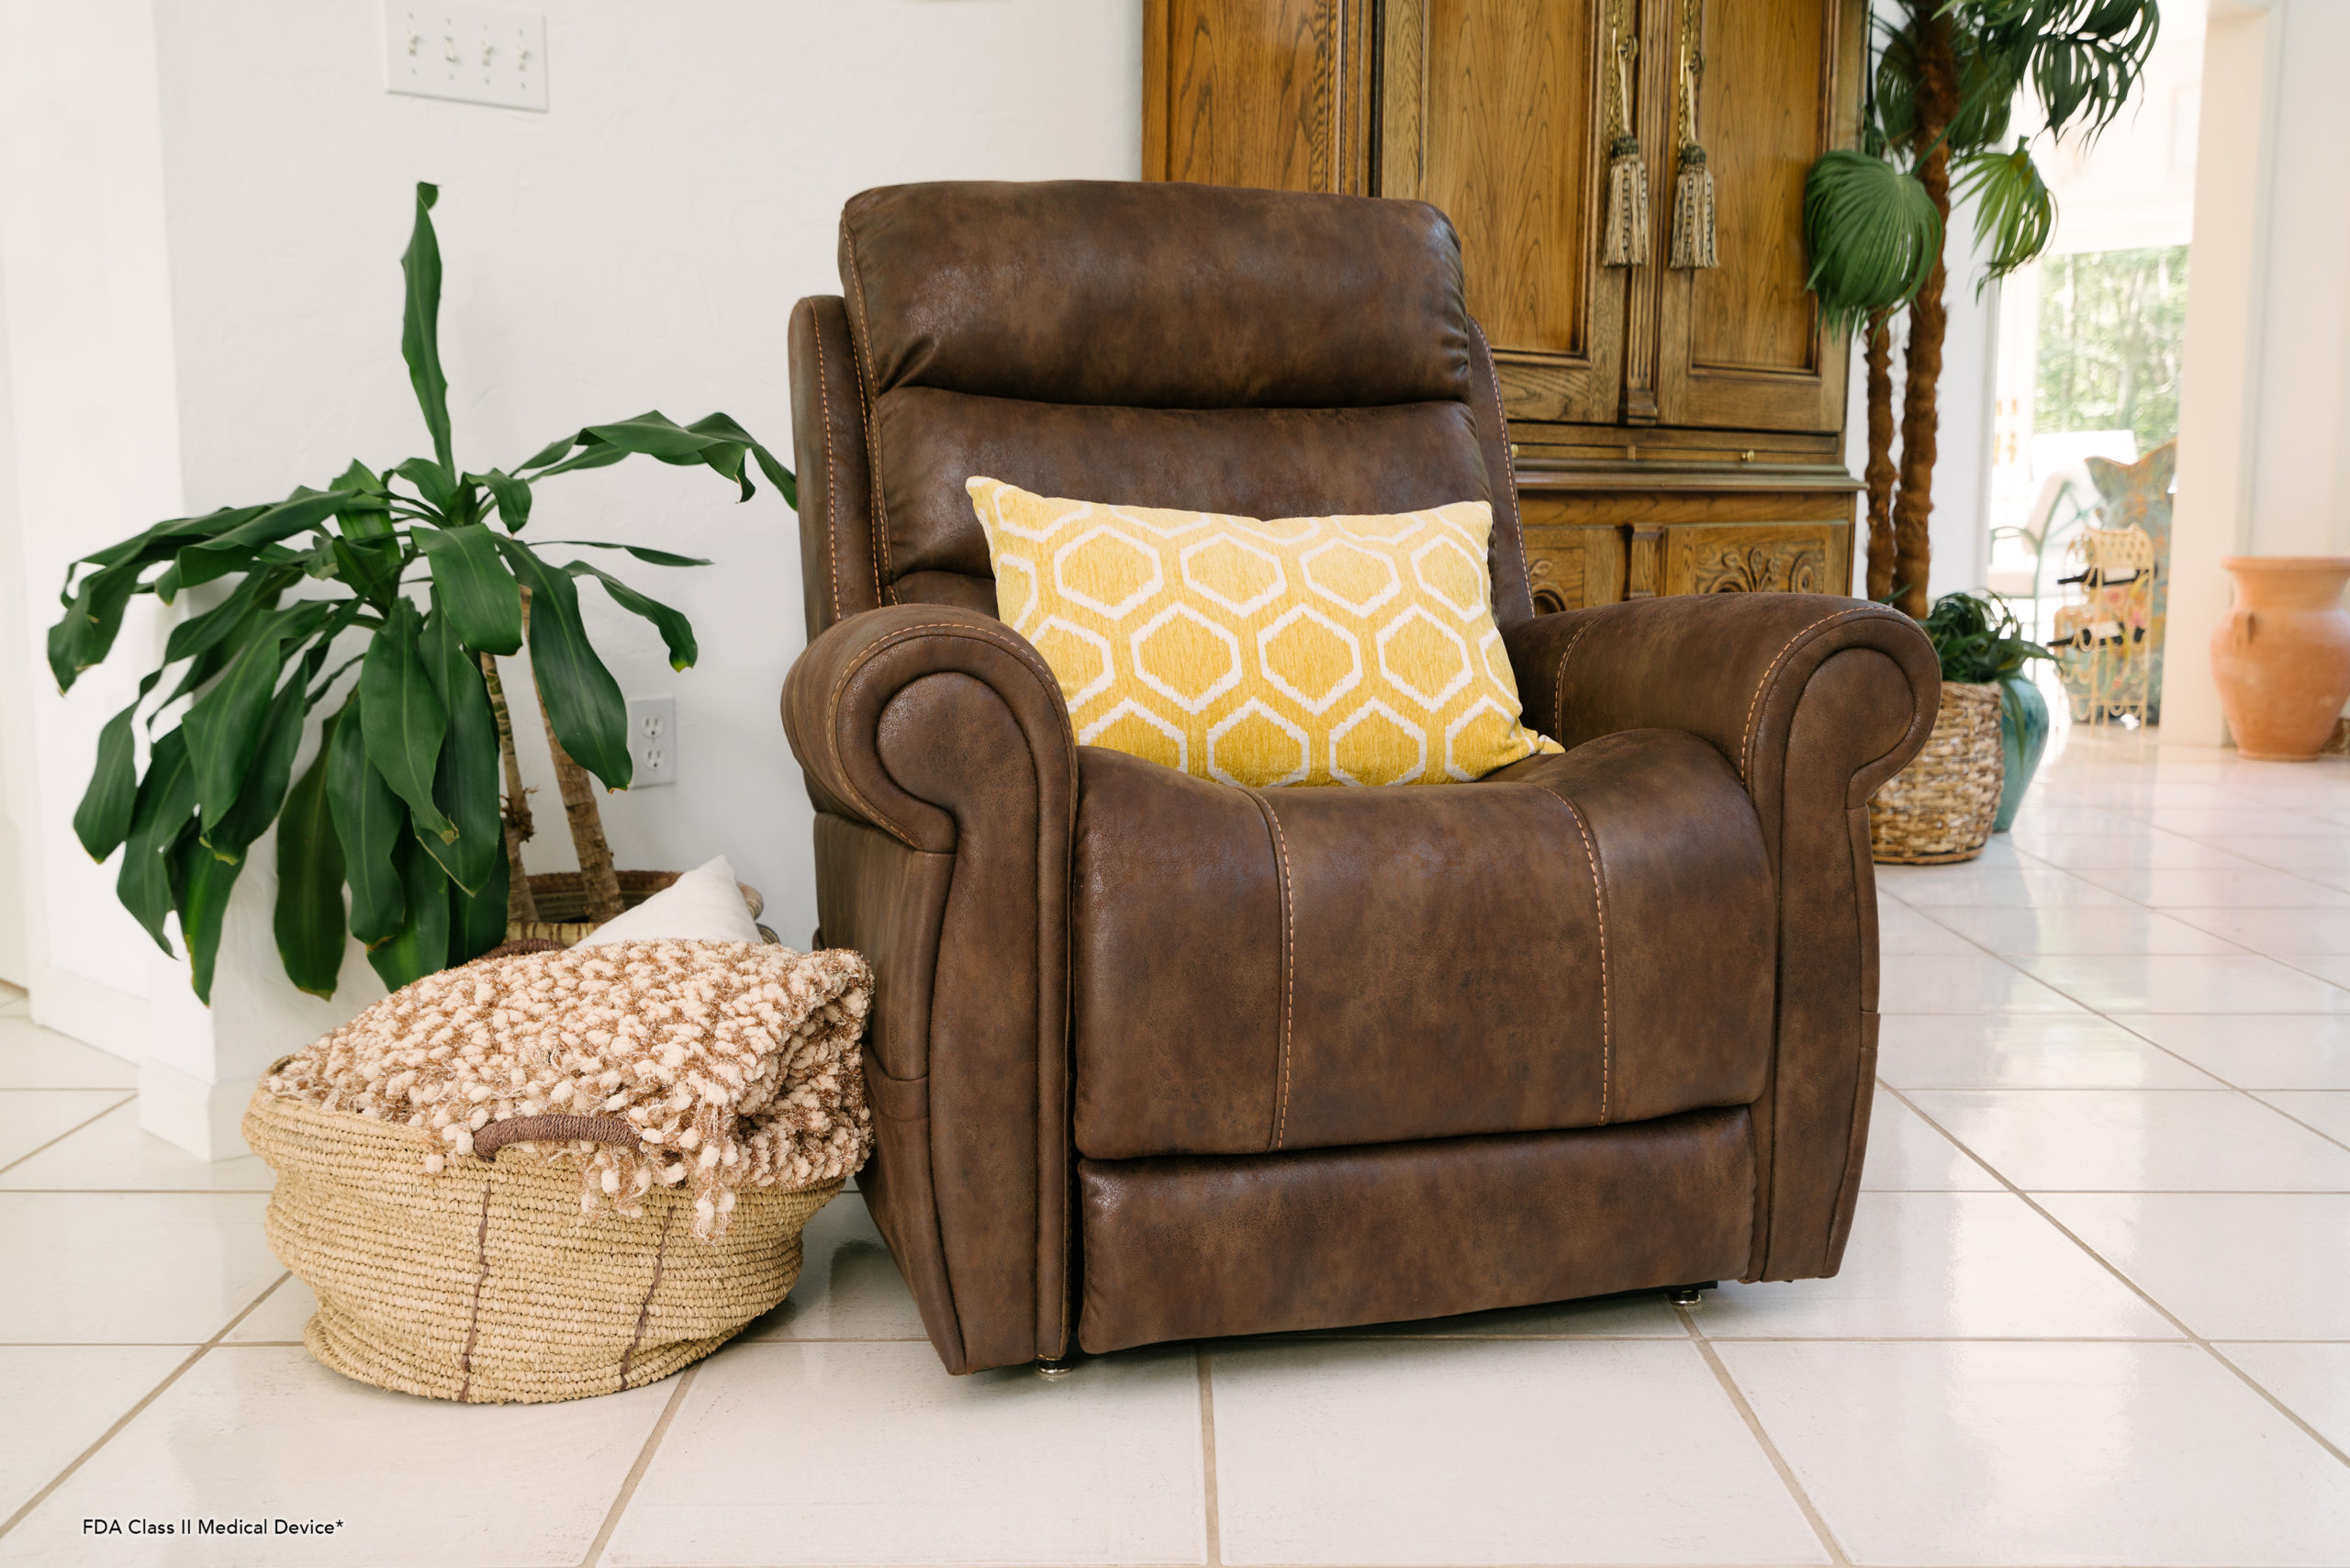 An adjustable, leather lounge chair with a yellow pillow on it.